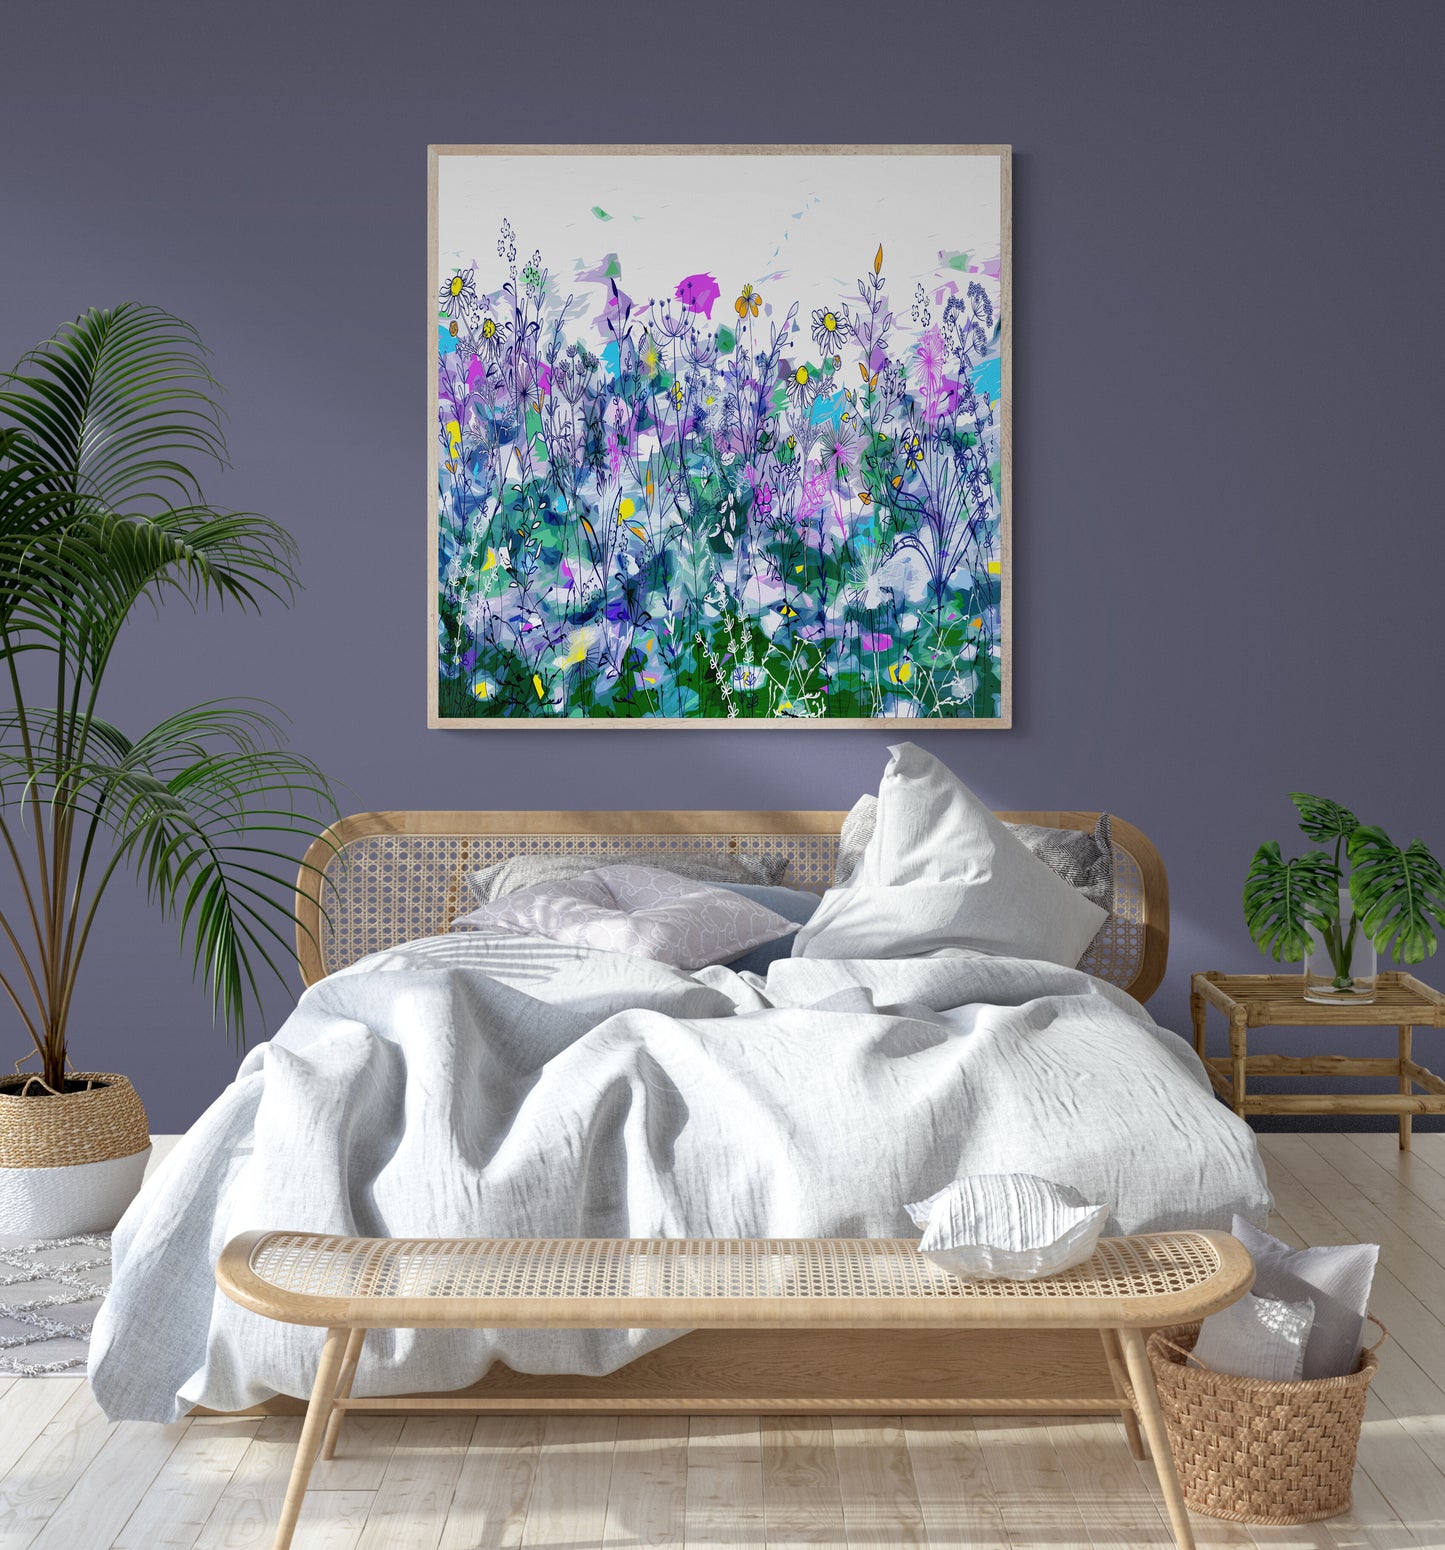 Purple and Green Floral Meadow Wall Art Print on Stretched Canvas or Fine Art Paper - DM40